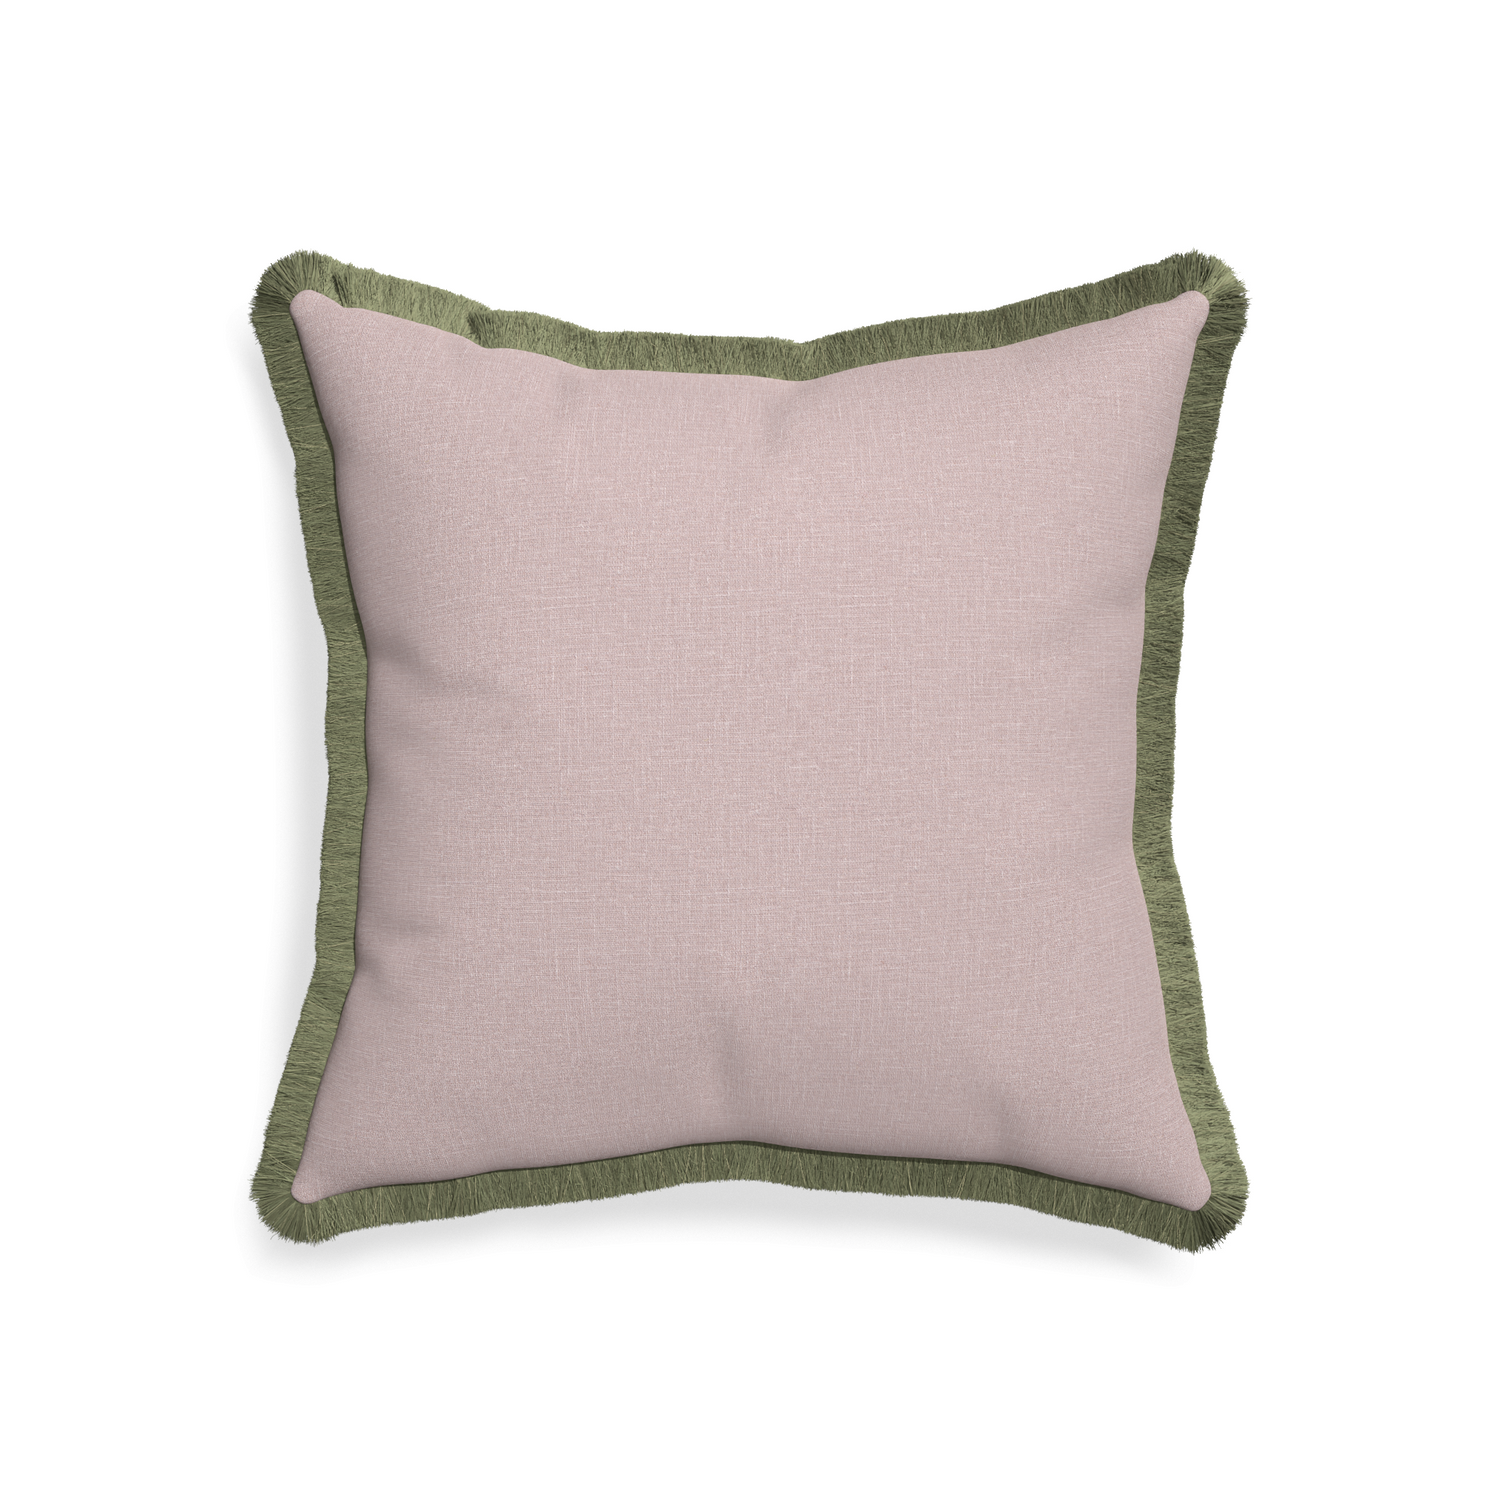 20-square orchid custom mauve pinkpillow with sage fringe on white background